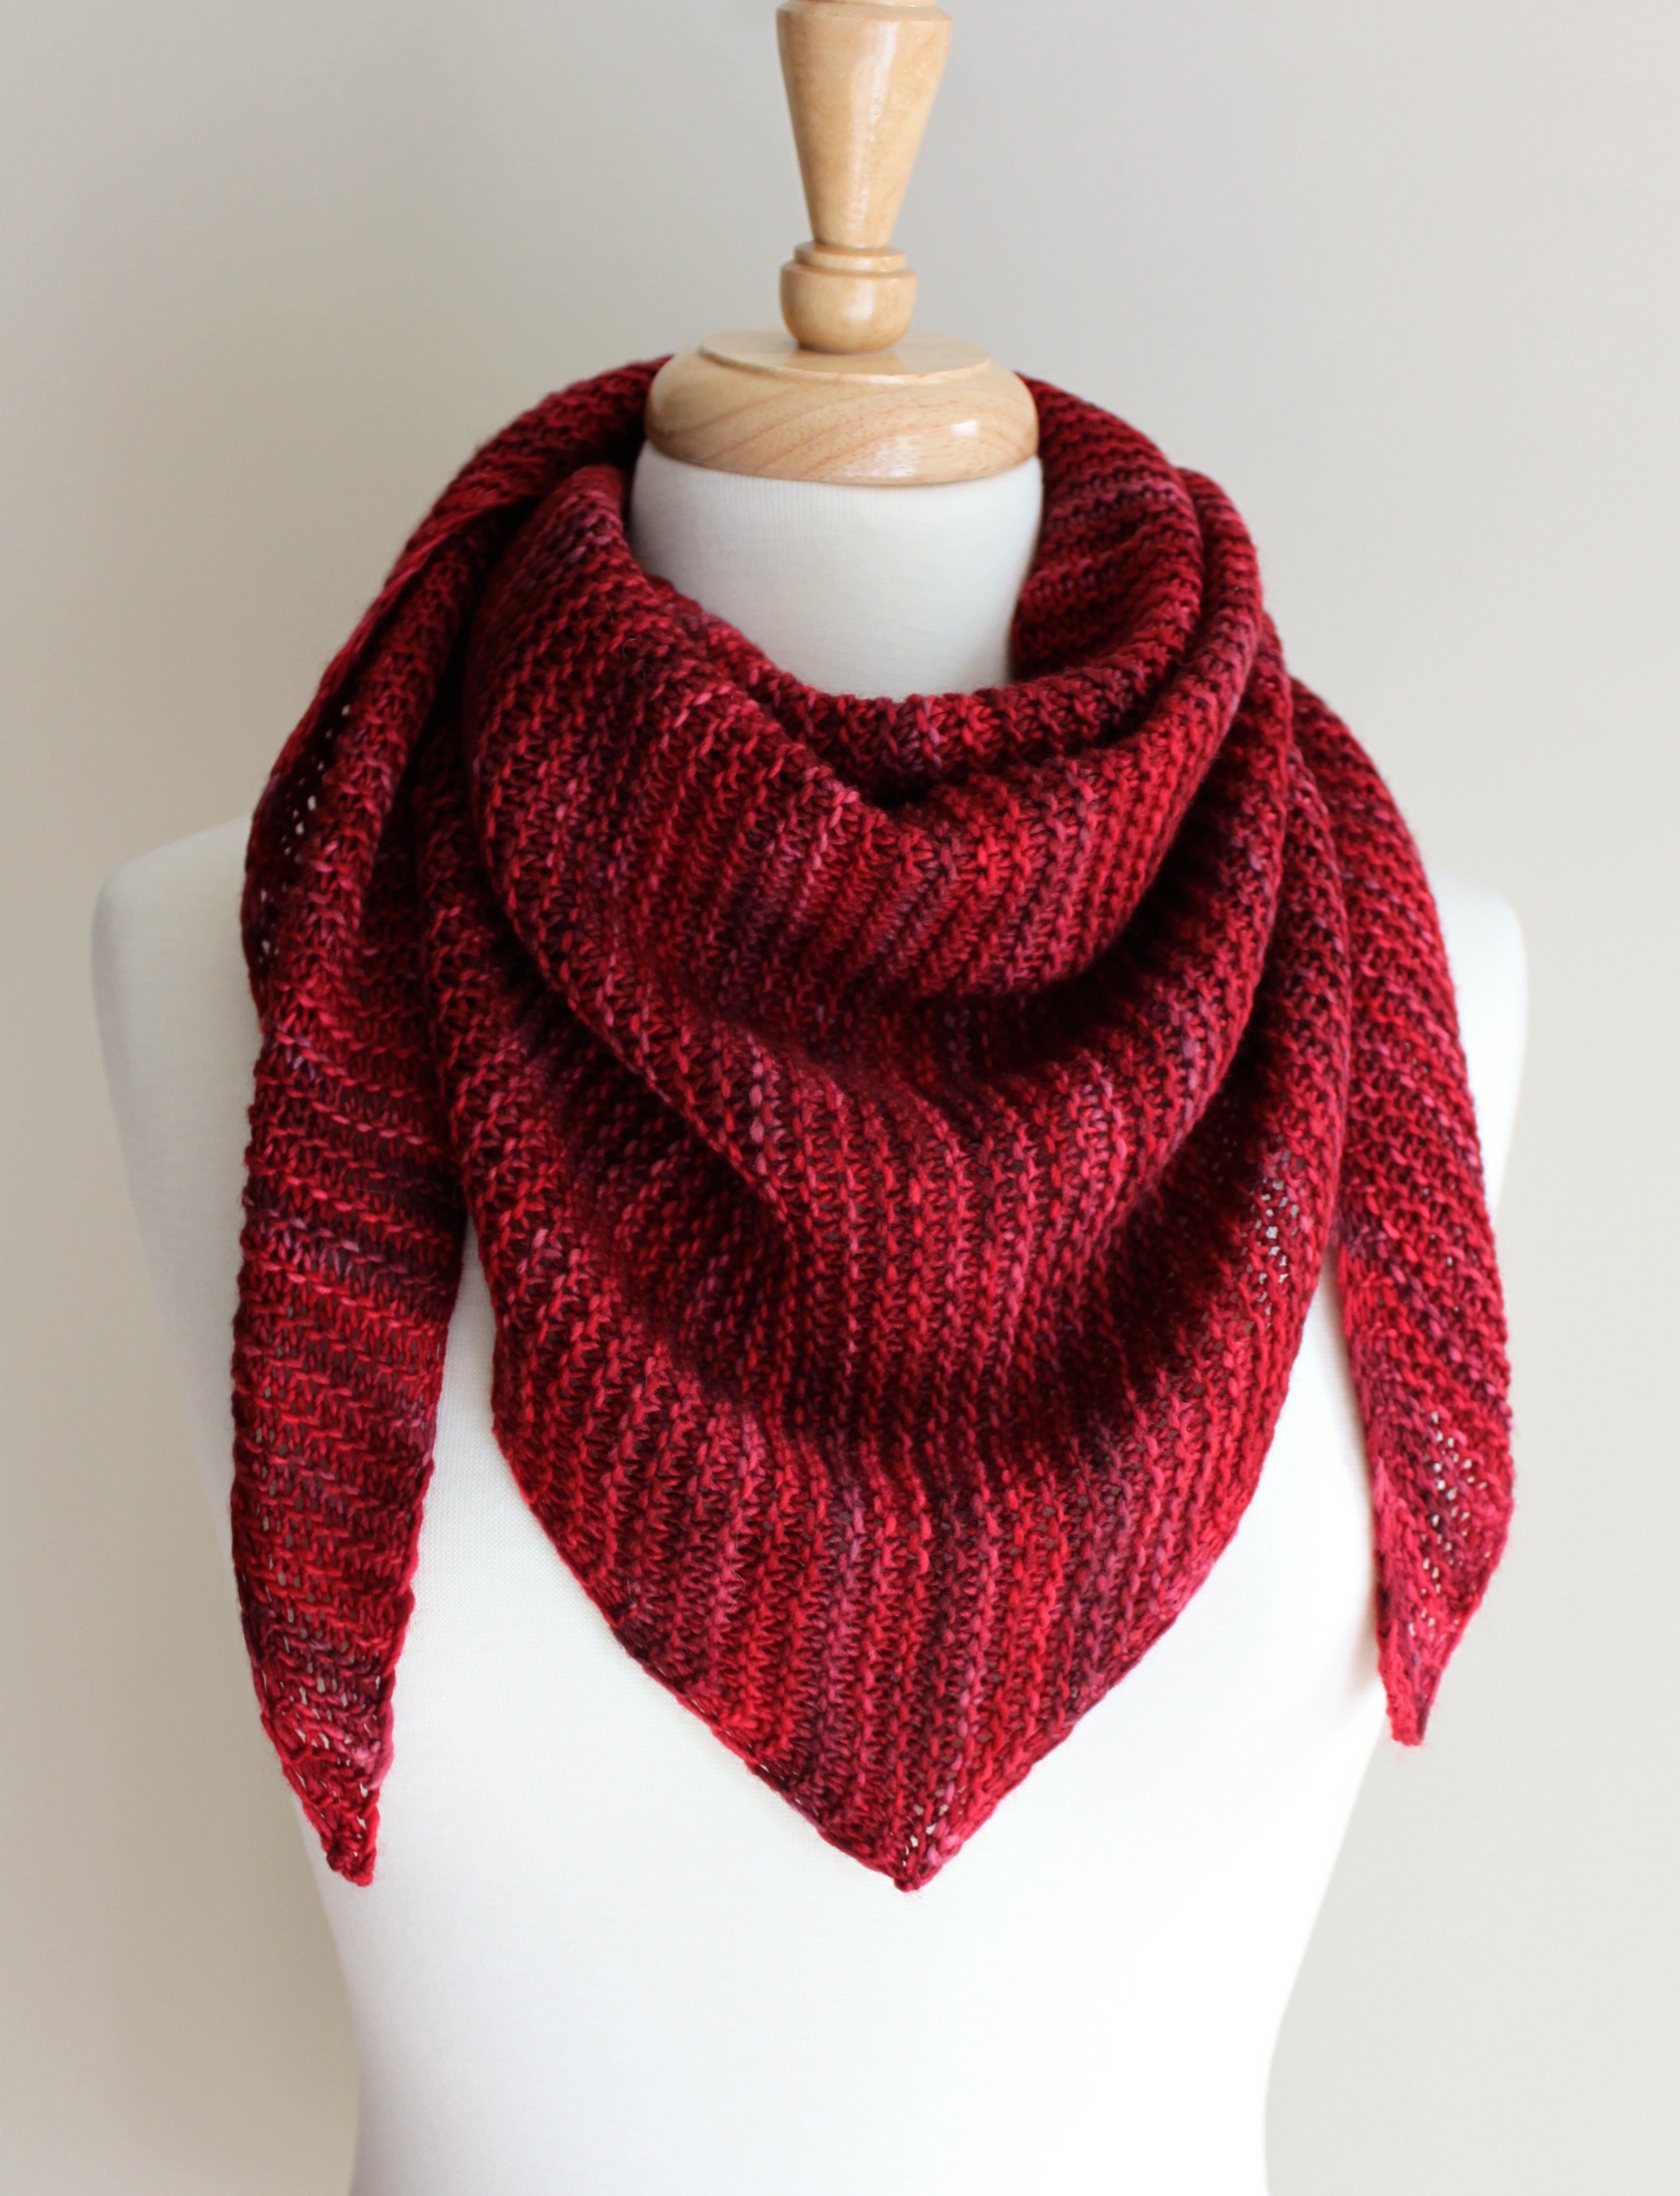 Knitting Pattern For Scarfs Free Knitting Patterns Truly Triangular Scarf Leah Michelle Designs